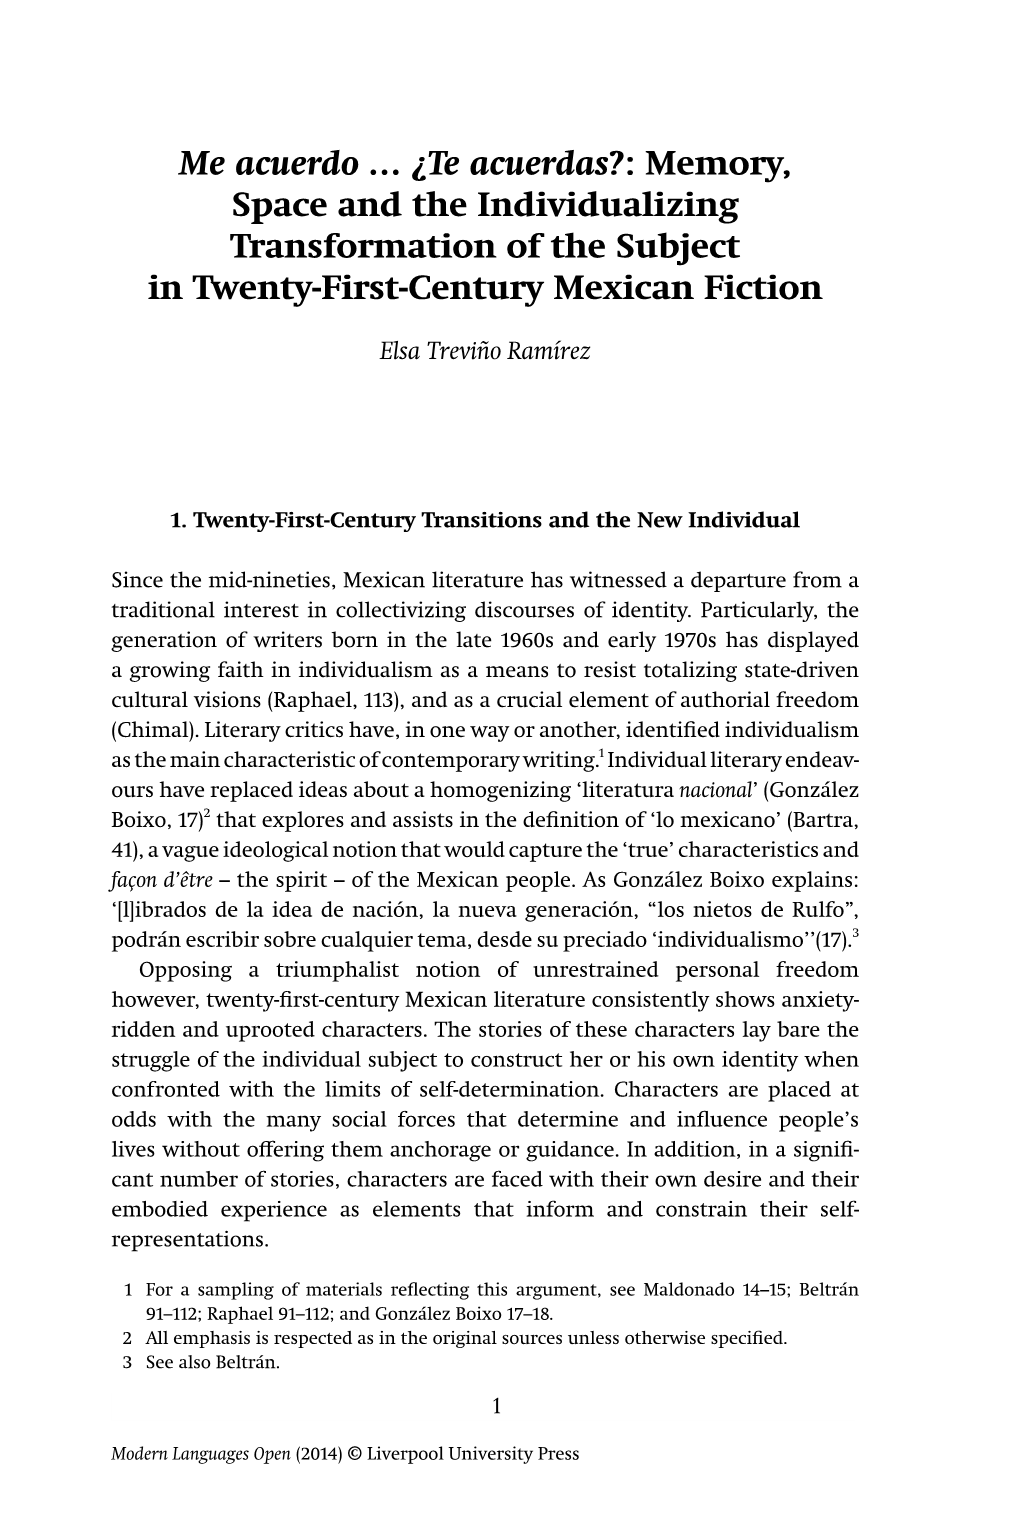 Memory, Space and the Individualizing Transformation of the Subject in Twenty-First-Century Mexican Fiction